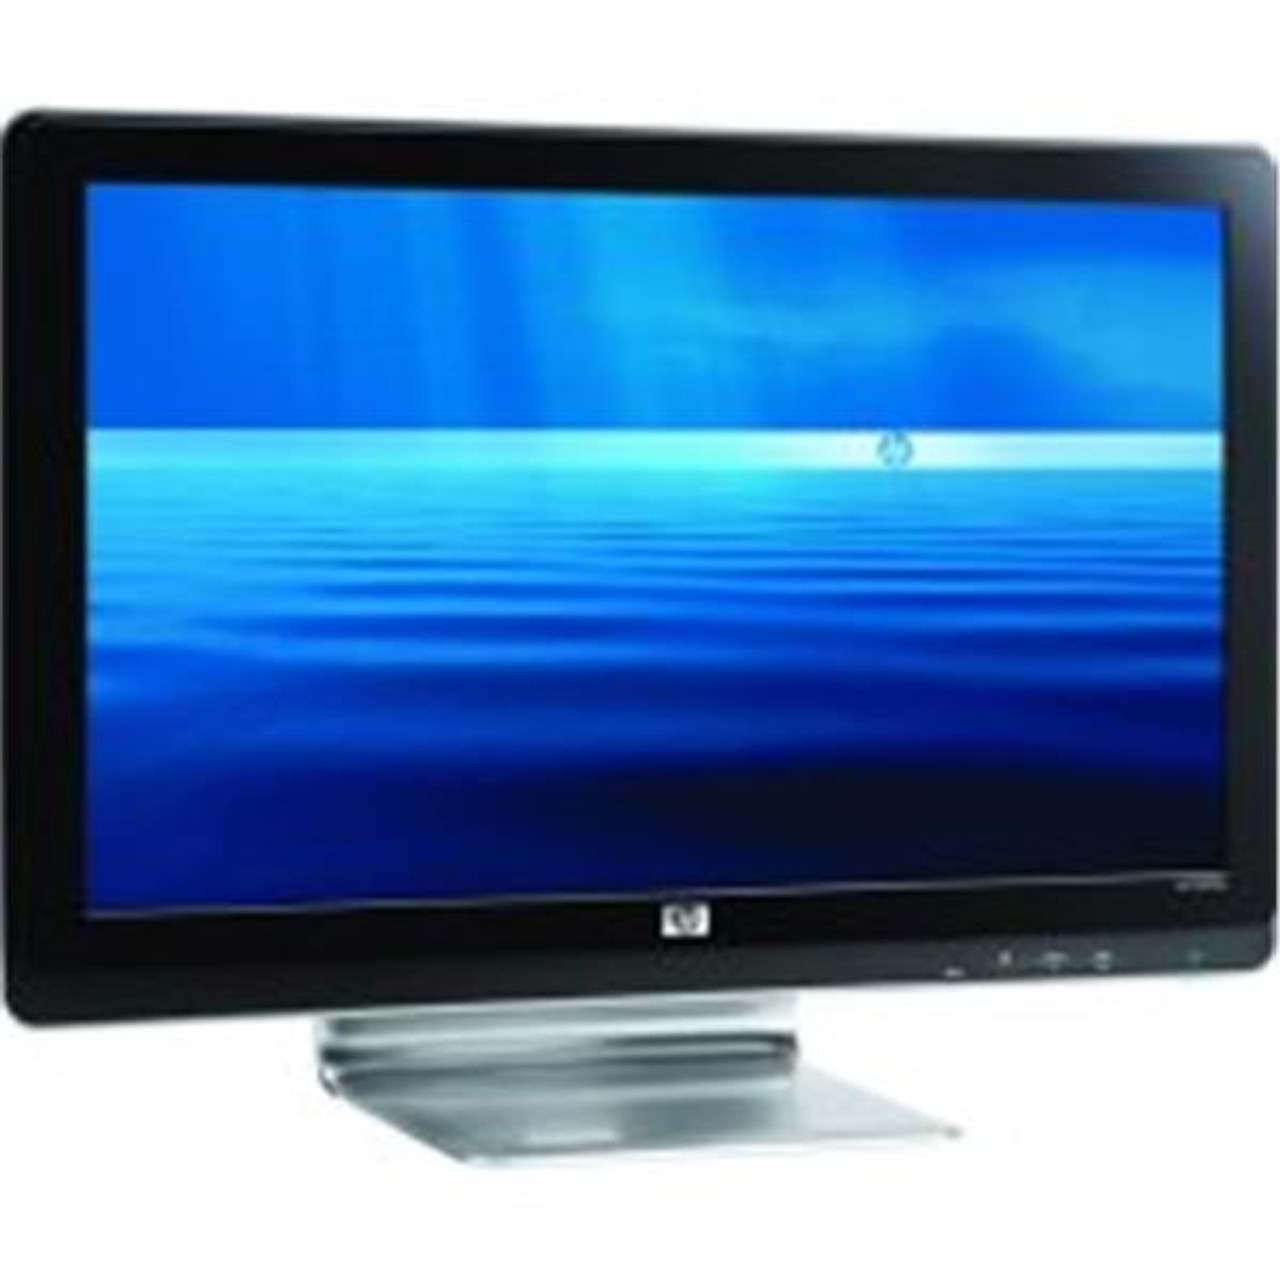 2009M - HP 2009M 20-inch Widescreen LCD Monitor with built-in speakers